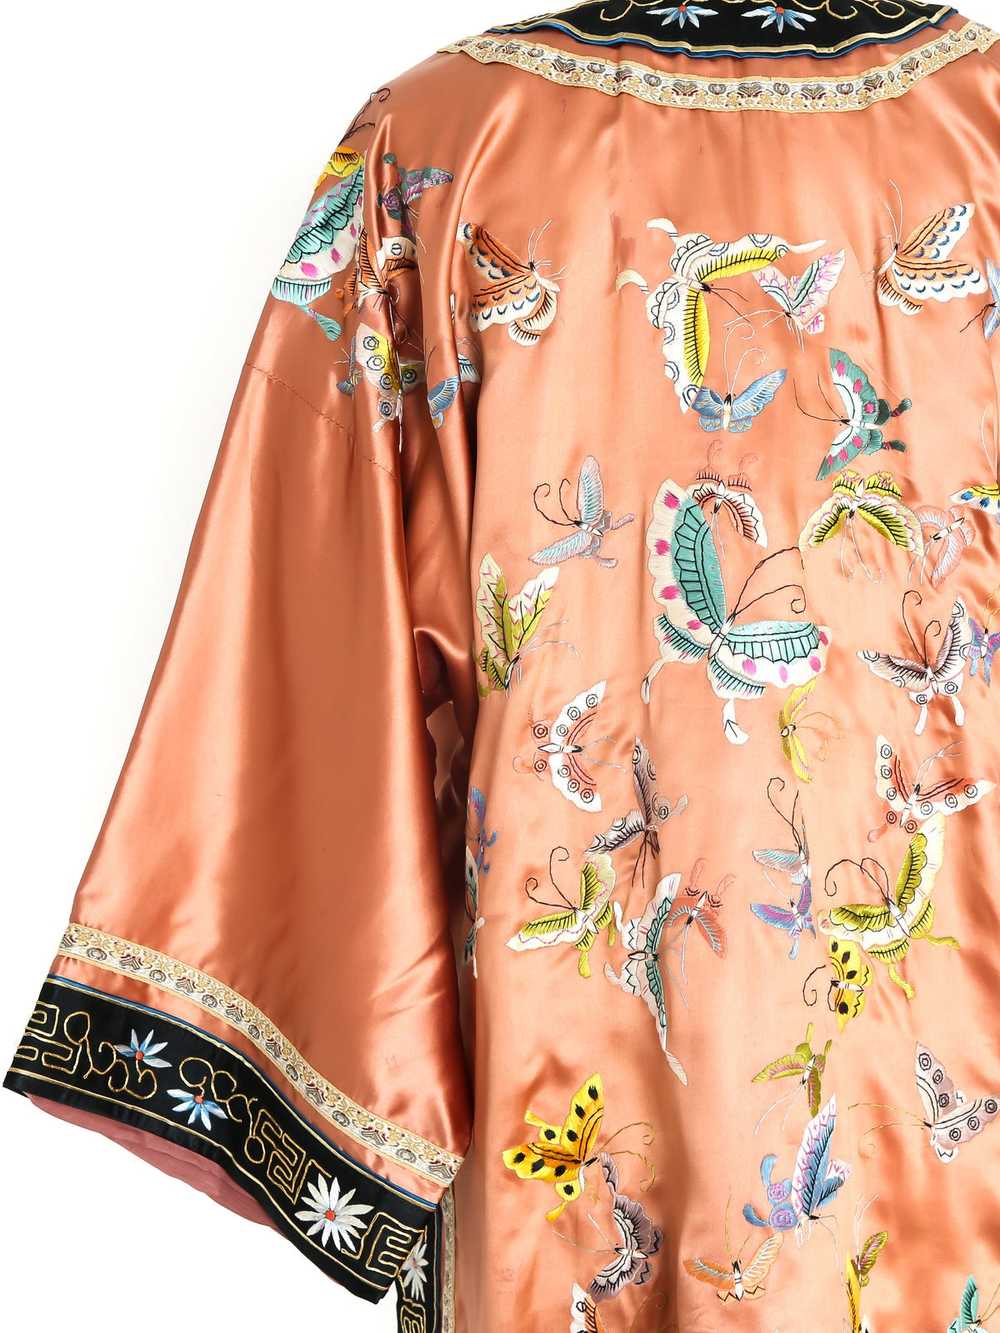 Hand Embroidered Chinese Silk Robe - image 2